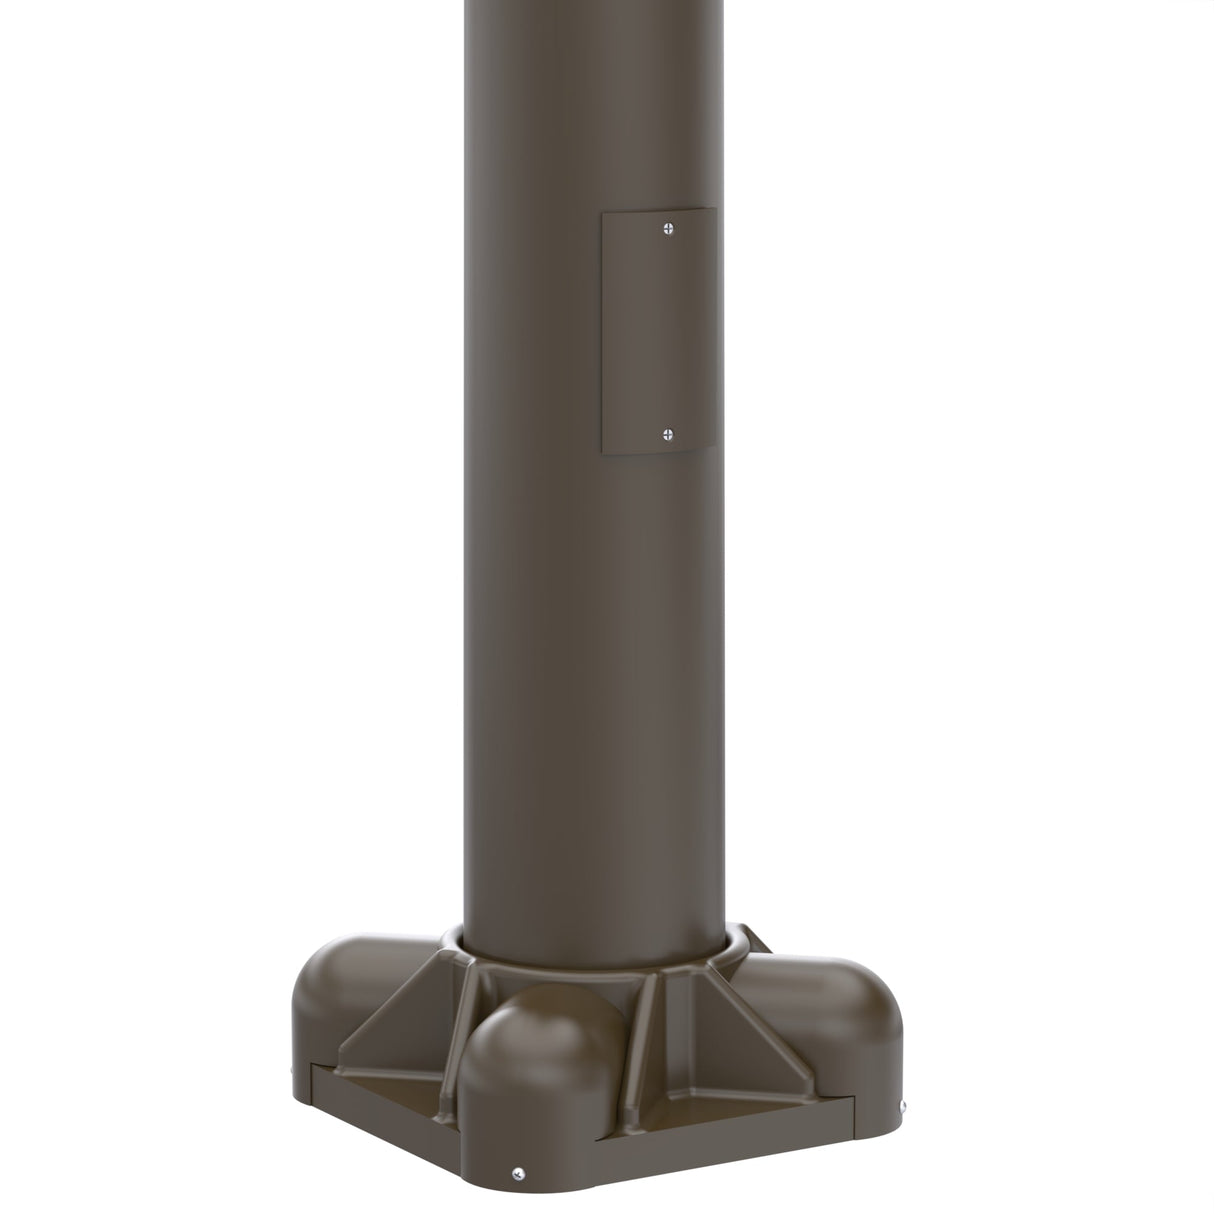 8' Tall x 4.0" Base OD x 3.0" Top OD x 0.125" Thick, Round Tapered Aluminum, Anchor Base Light Pole